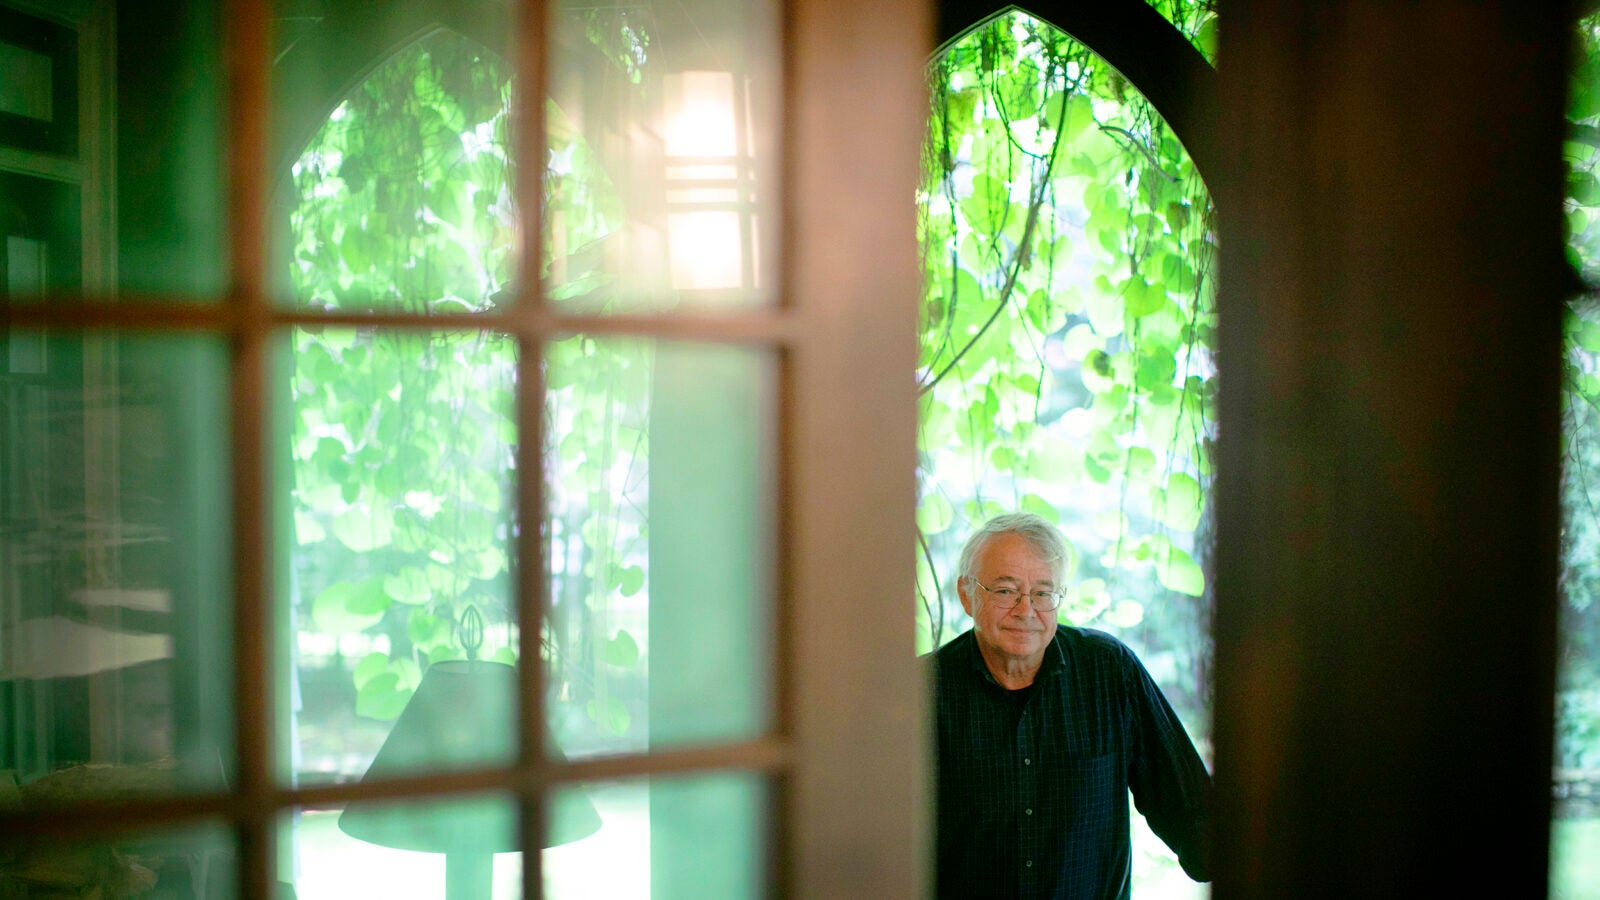 Stephen Coit, the artist of the Harvard Foundation Portraiture Project, is pictured in his Cambridge home.